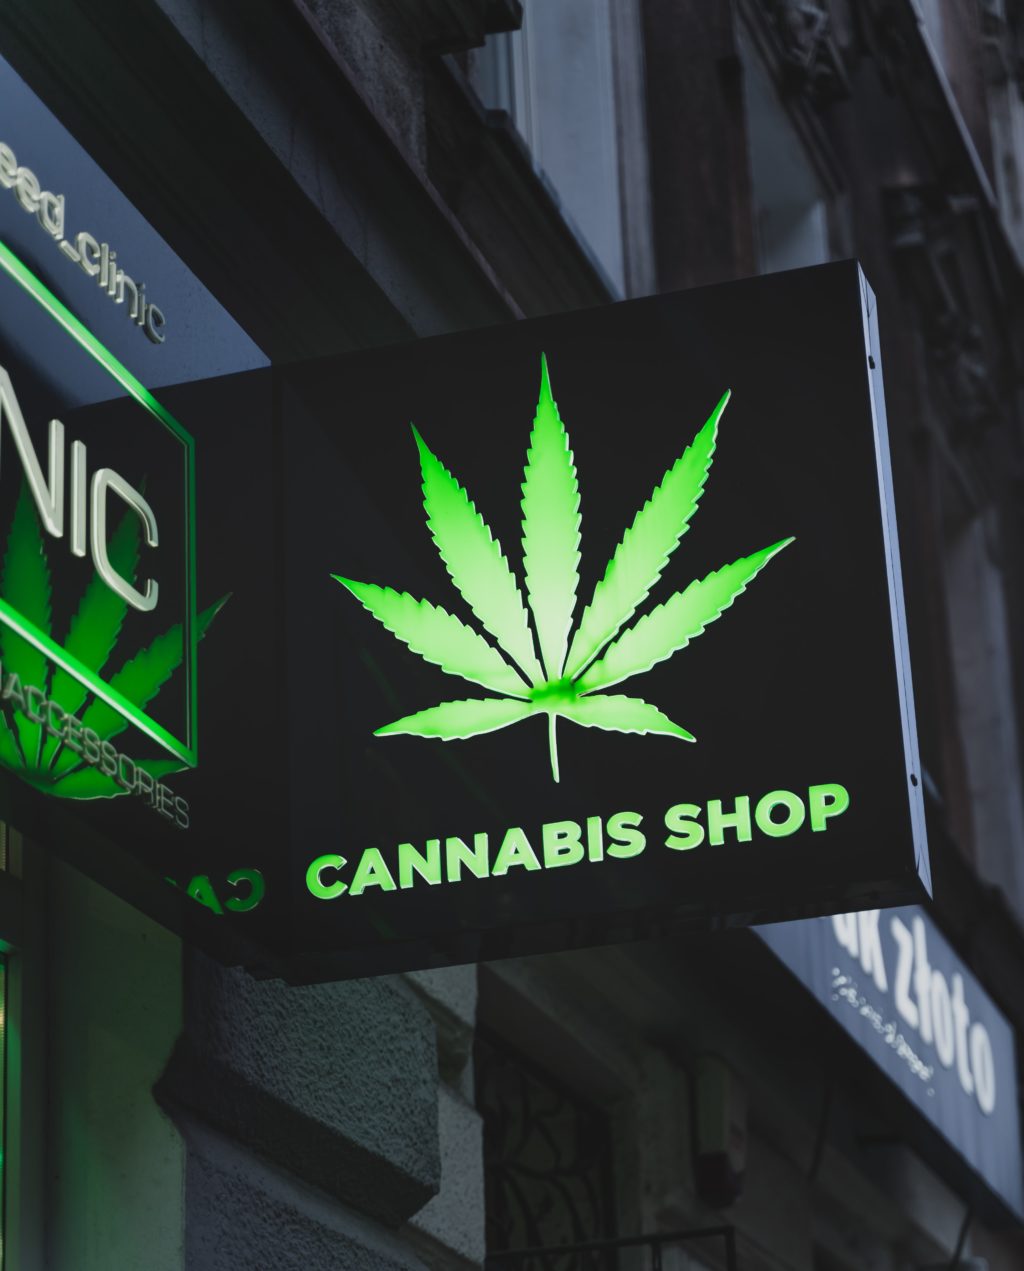 Increase of CBD Shops, but confusion still exists